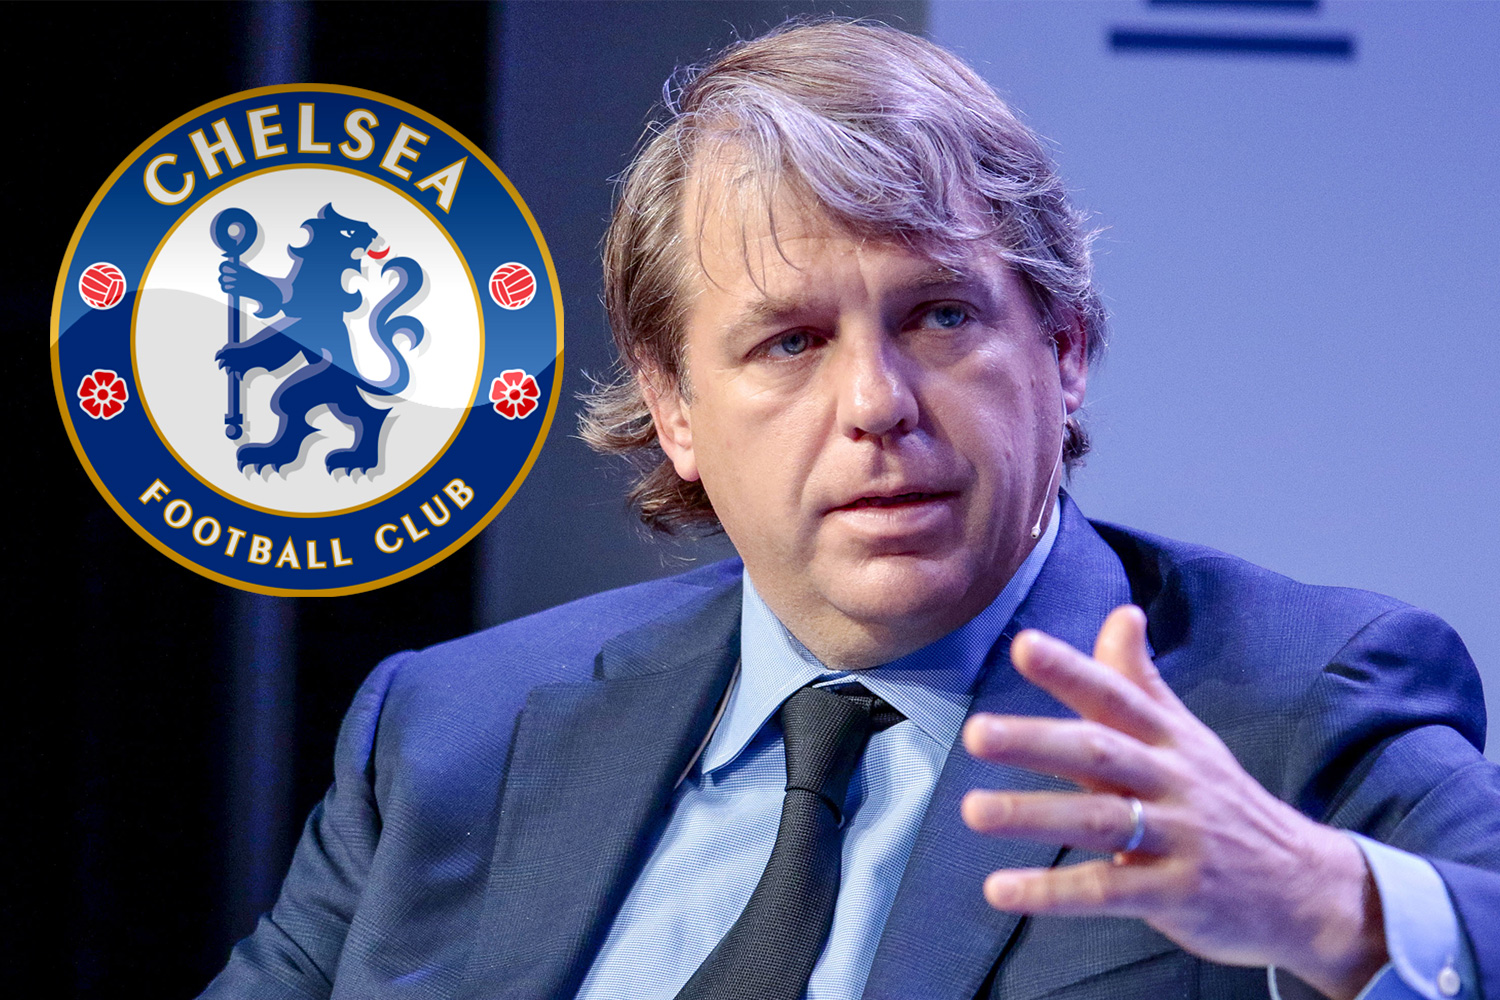 Chelsea Takeover Live Updates: Portugal approves sale of Chelsea FC by Roman Abramovich, British Government approved takeover to Todd Boehly - Check out